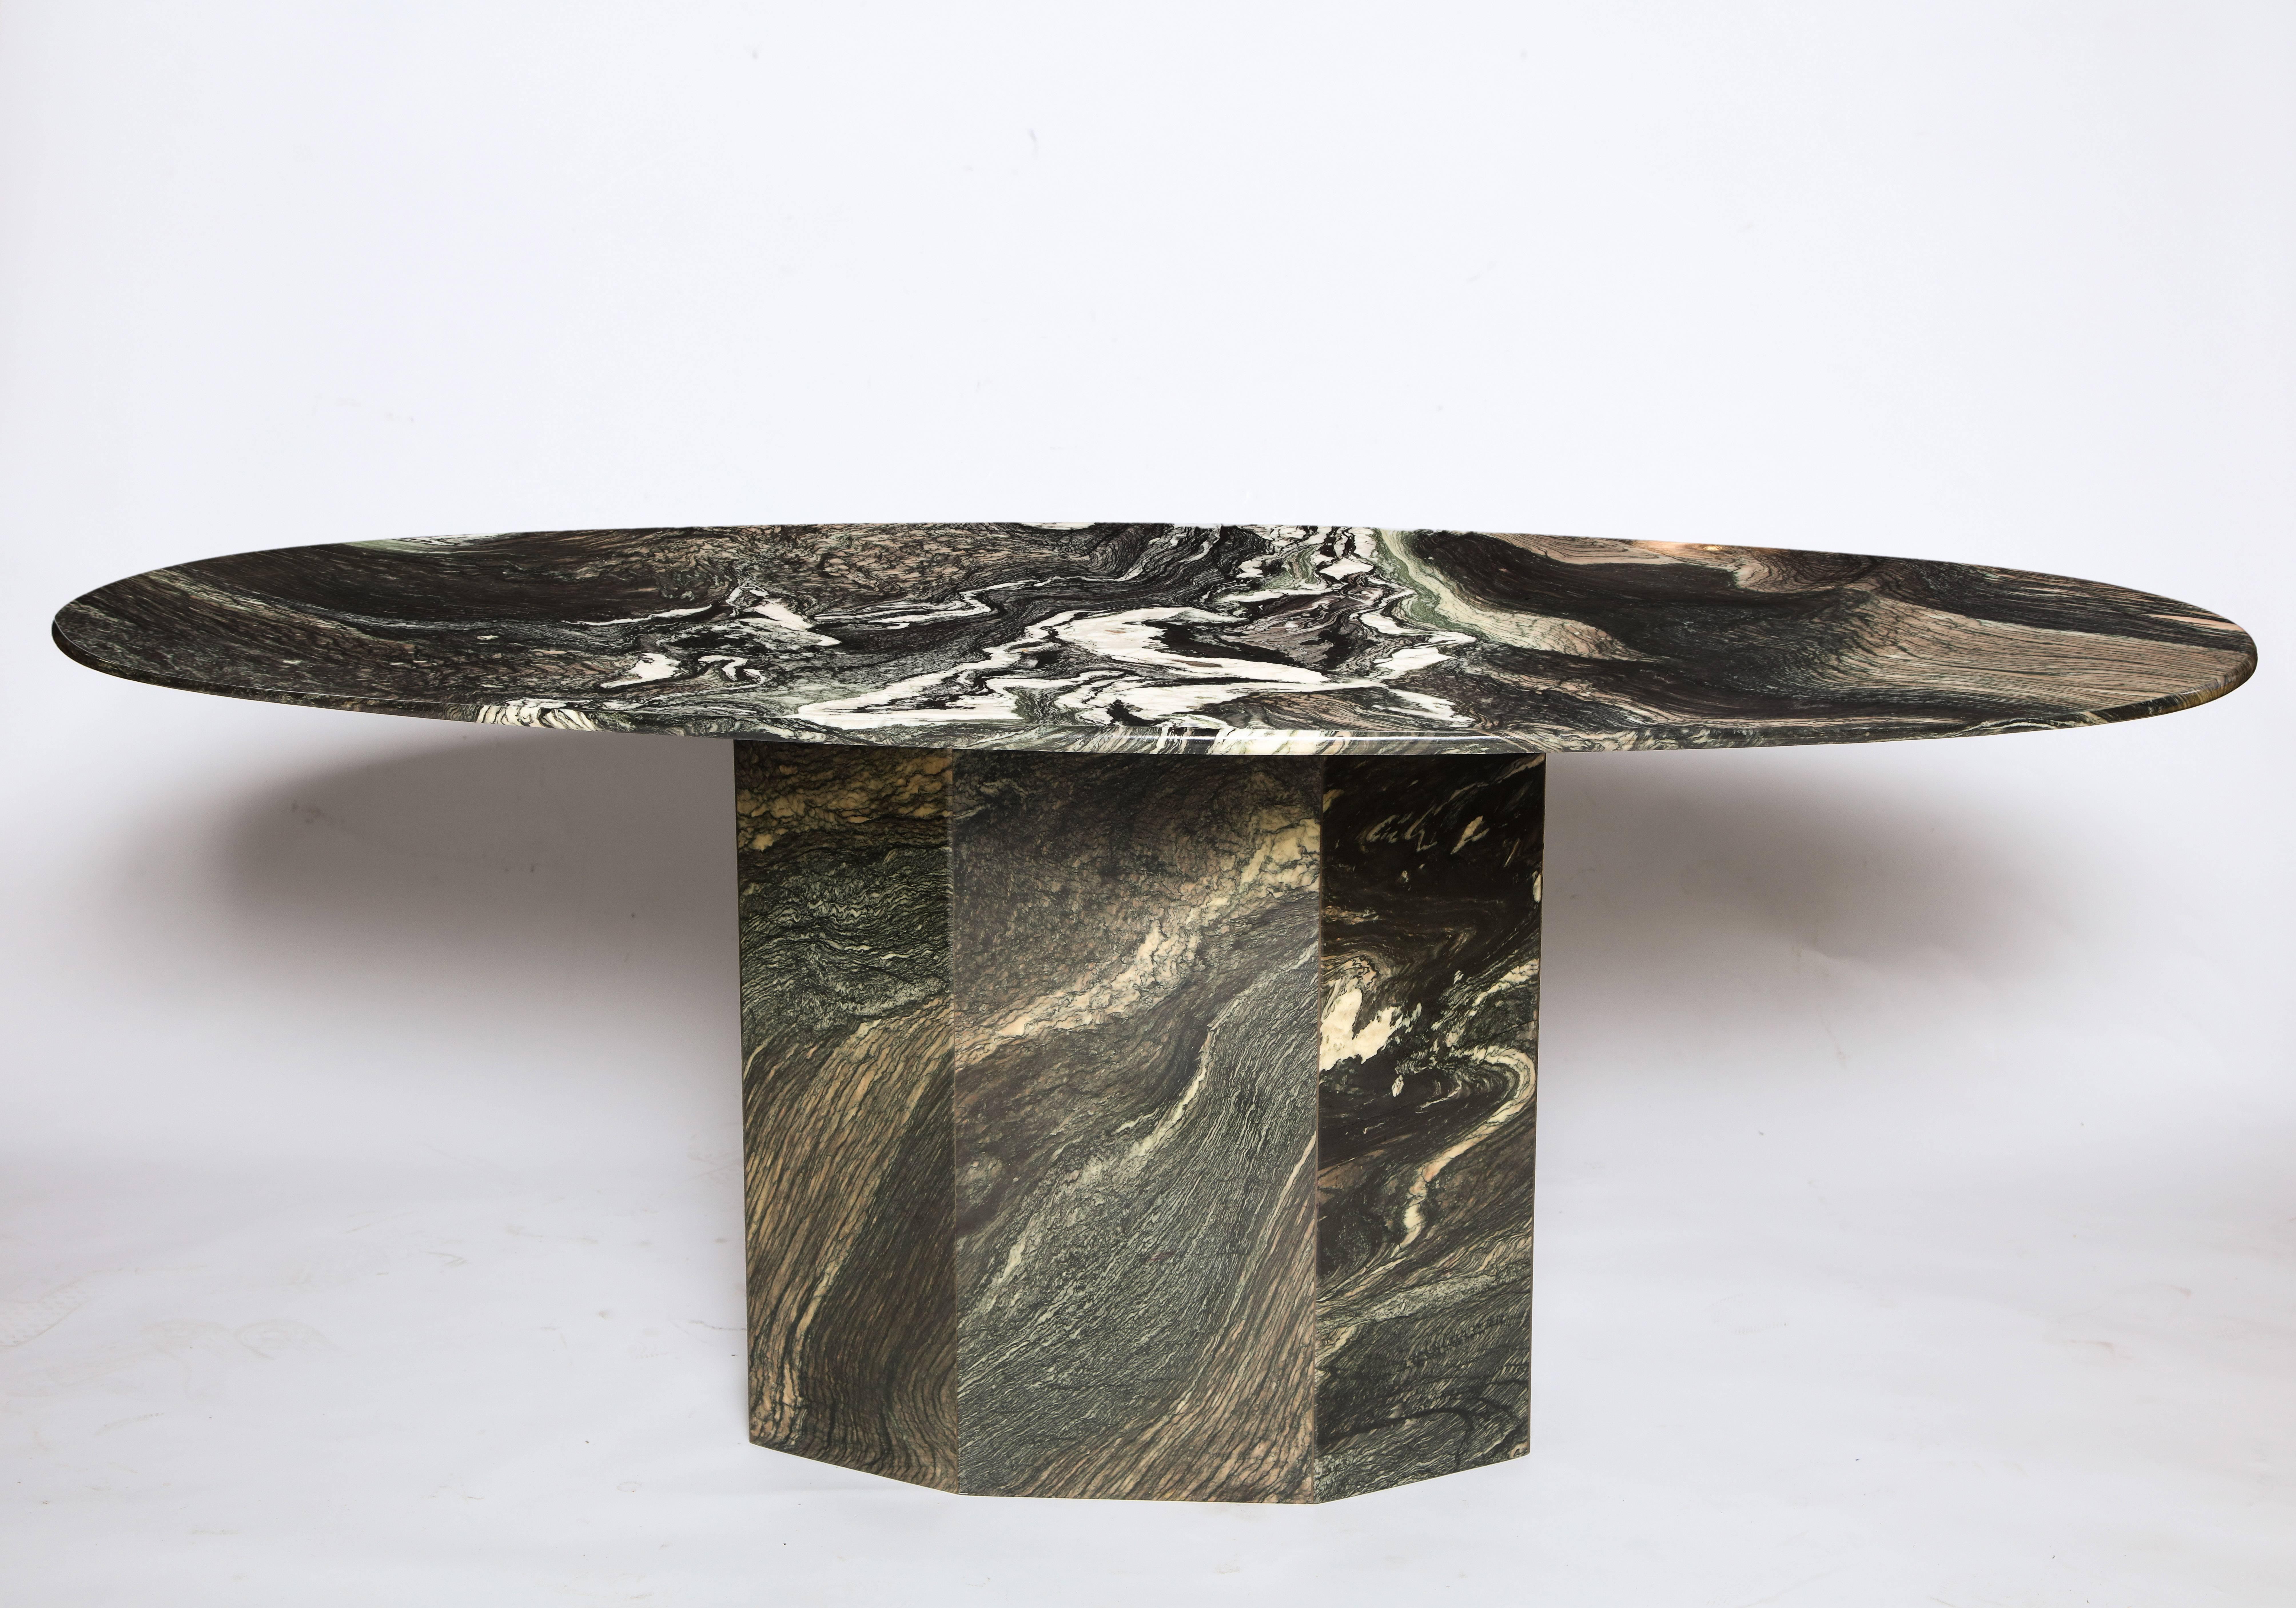 French brown green black white marble dining table desk, 1980s, France

Incredible organic Veining on this table with an array of colors that match any decor. Made in France in the 1980s.